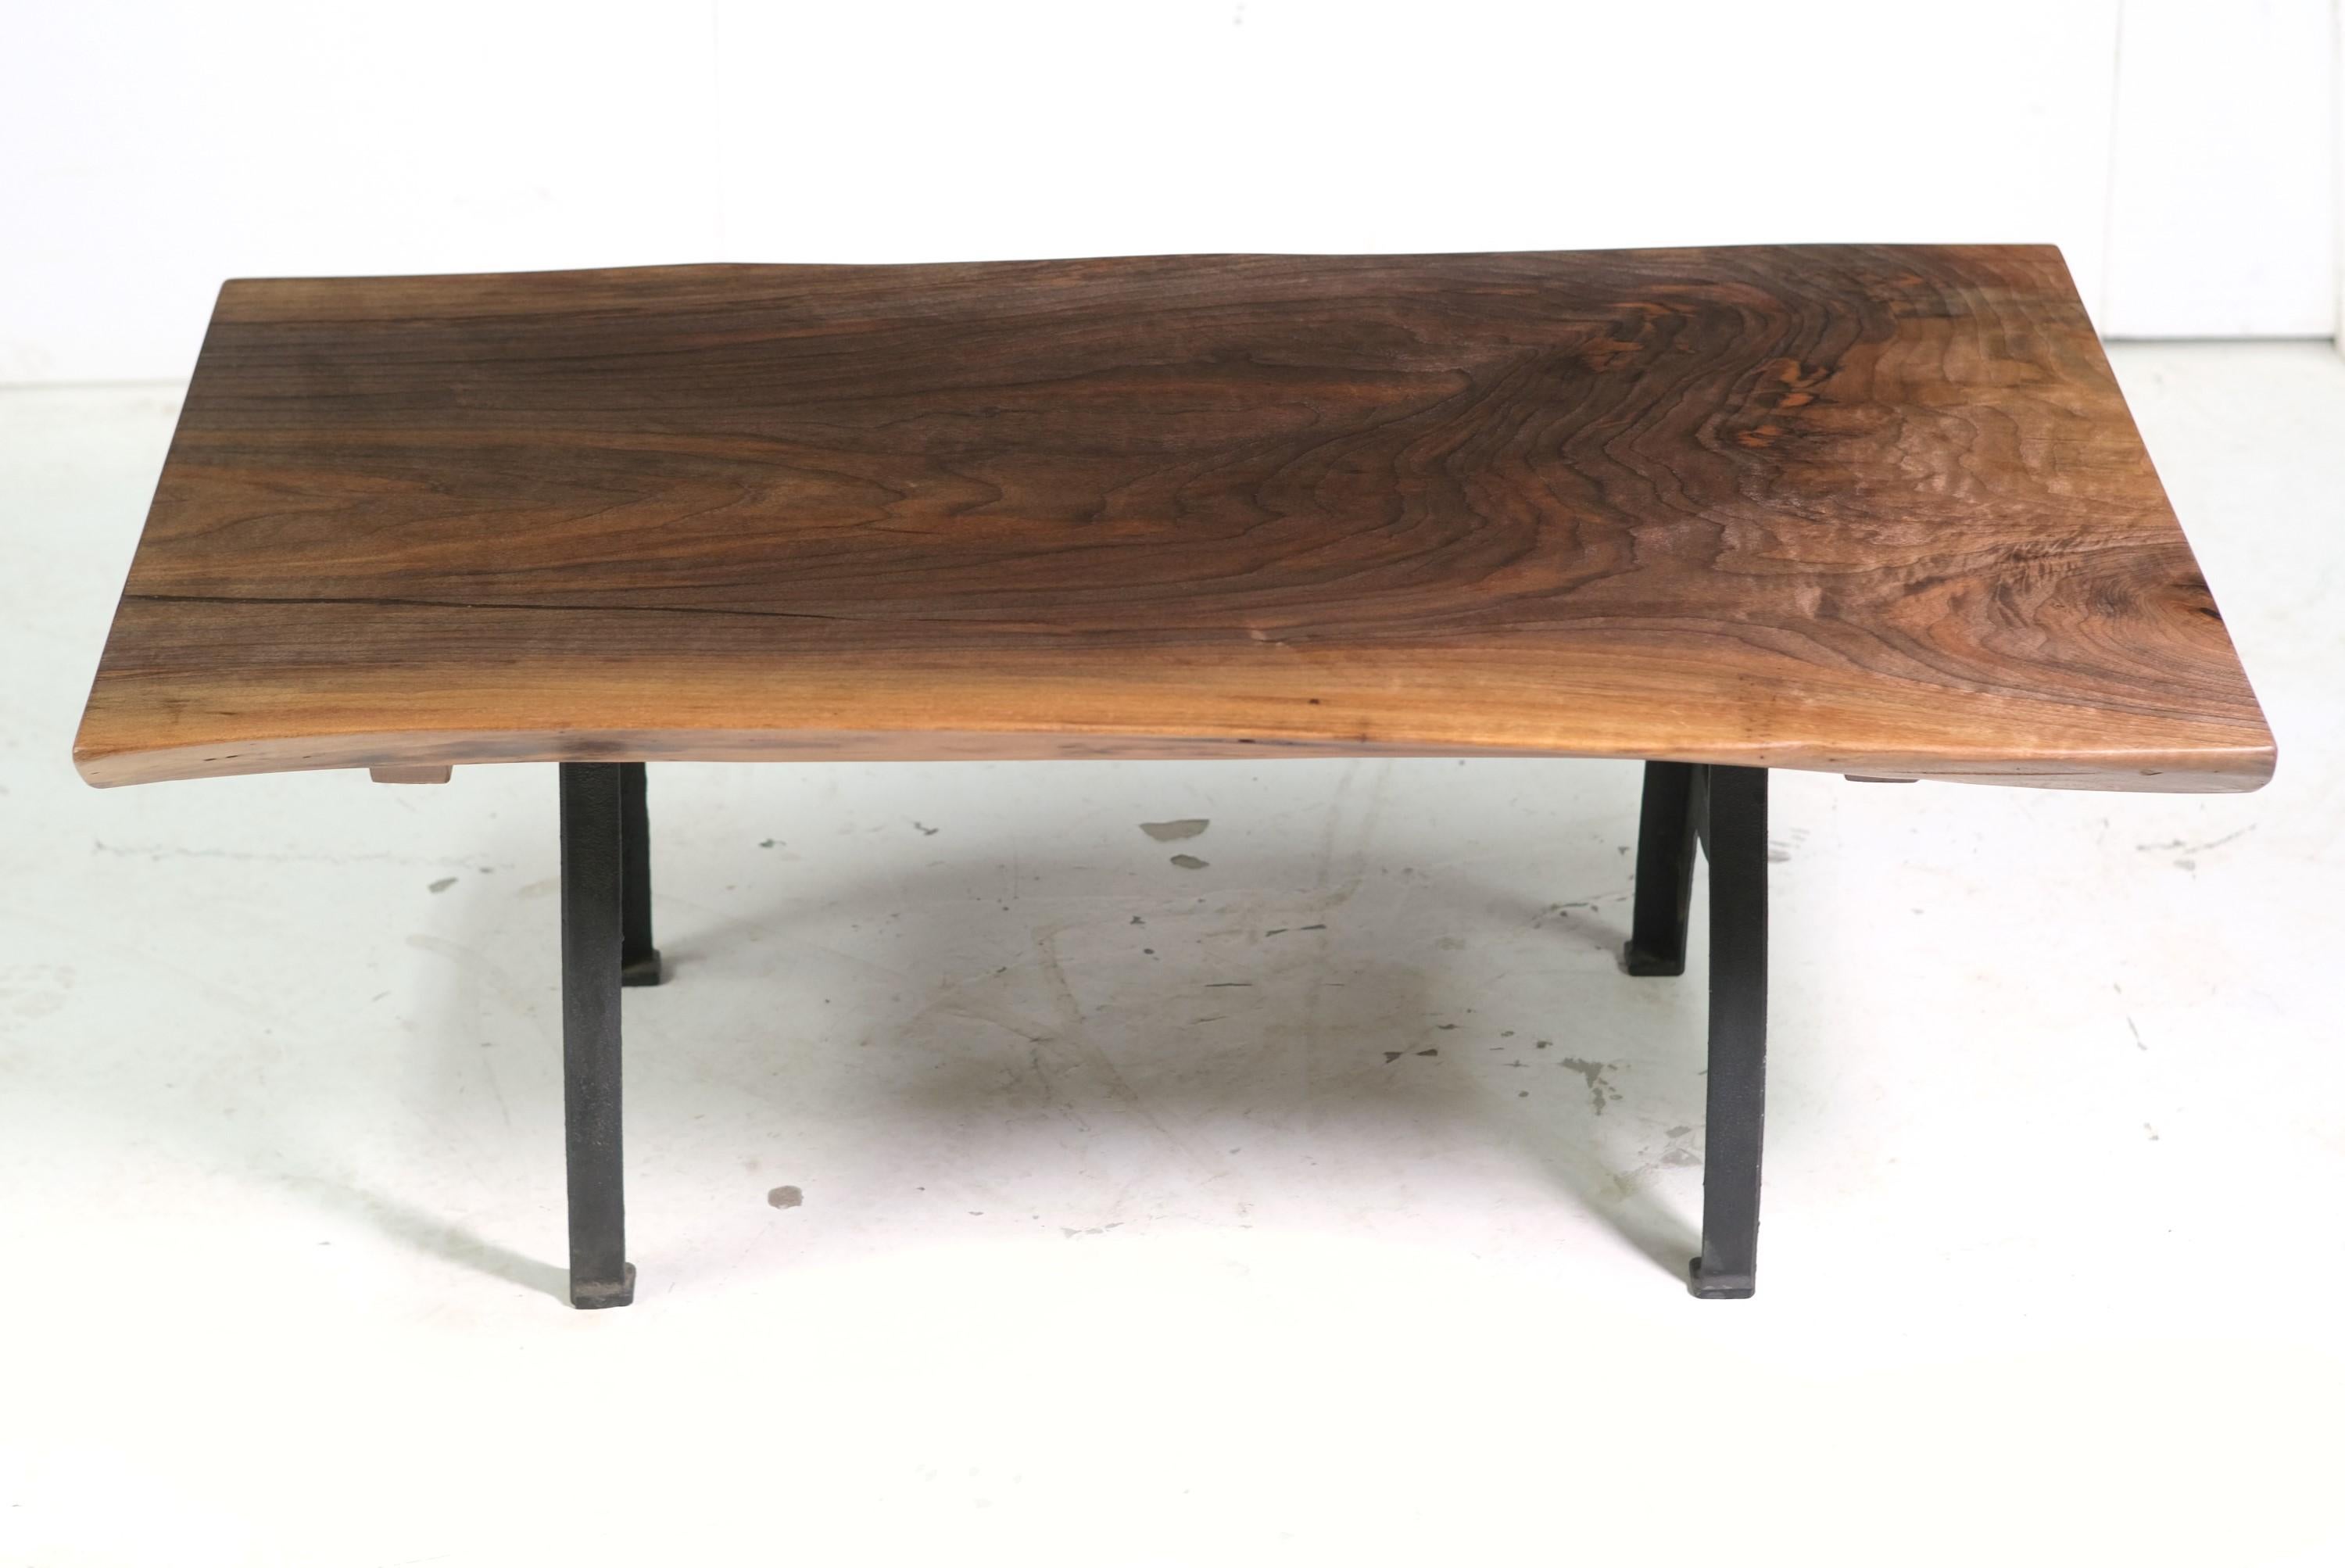 live edge coffee table with metal legs